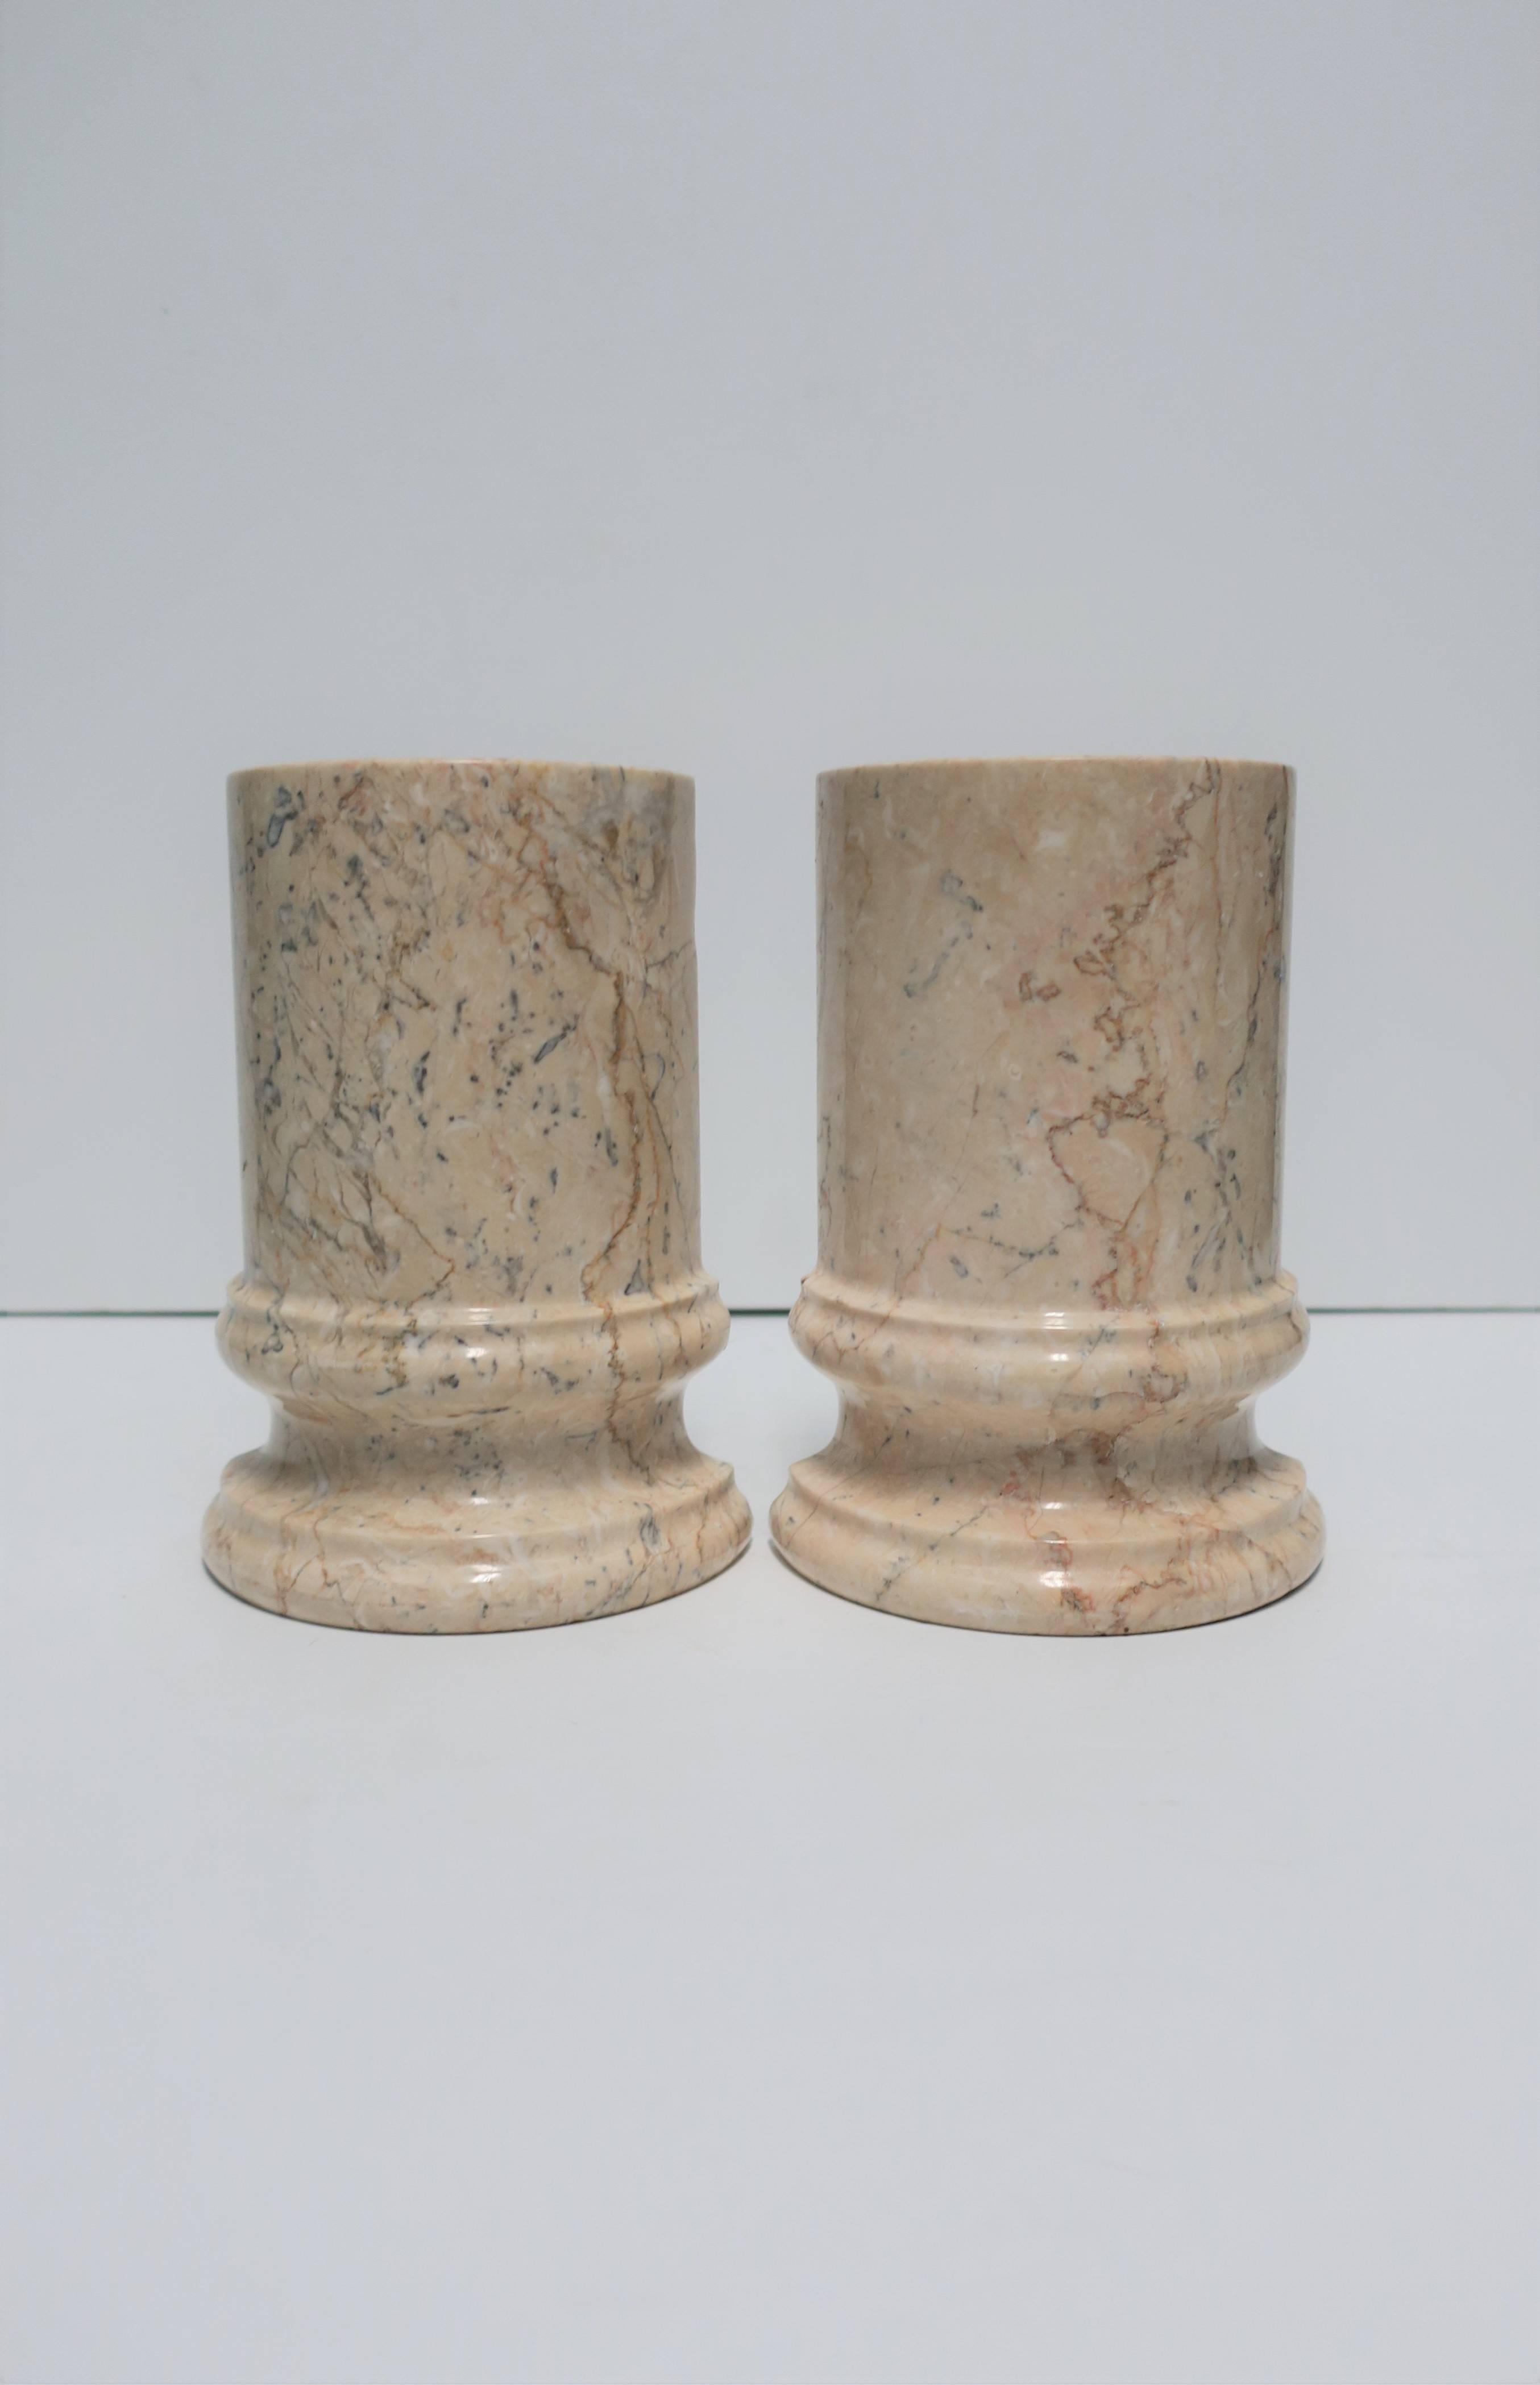 Pair of substantial vintage marble 'column' bookends in a predominantly tan or sand hue. 

Each bookend measures: 5 in. W x 7 in. H

